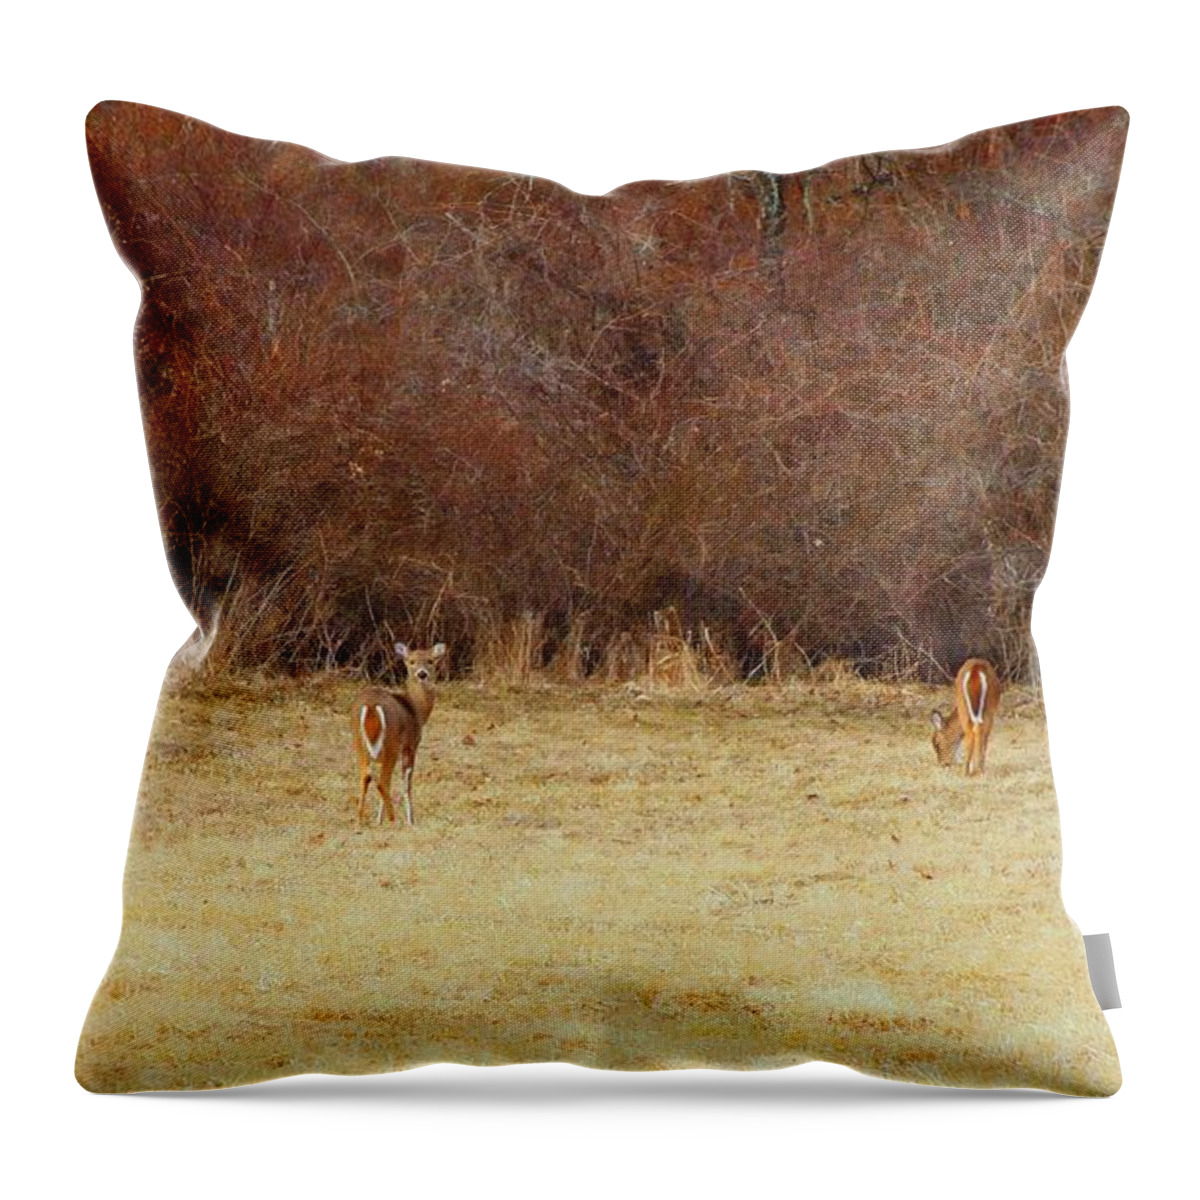 Marcia Lee Jones Throw Pillow featuring the photograph Guarding by Marcia Lee Jones